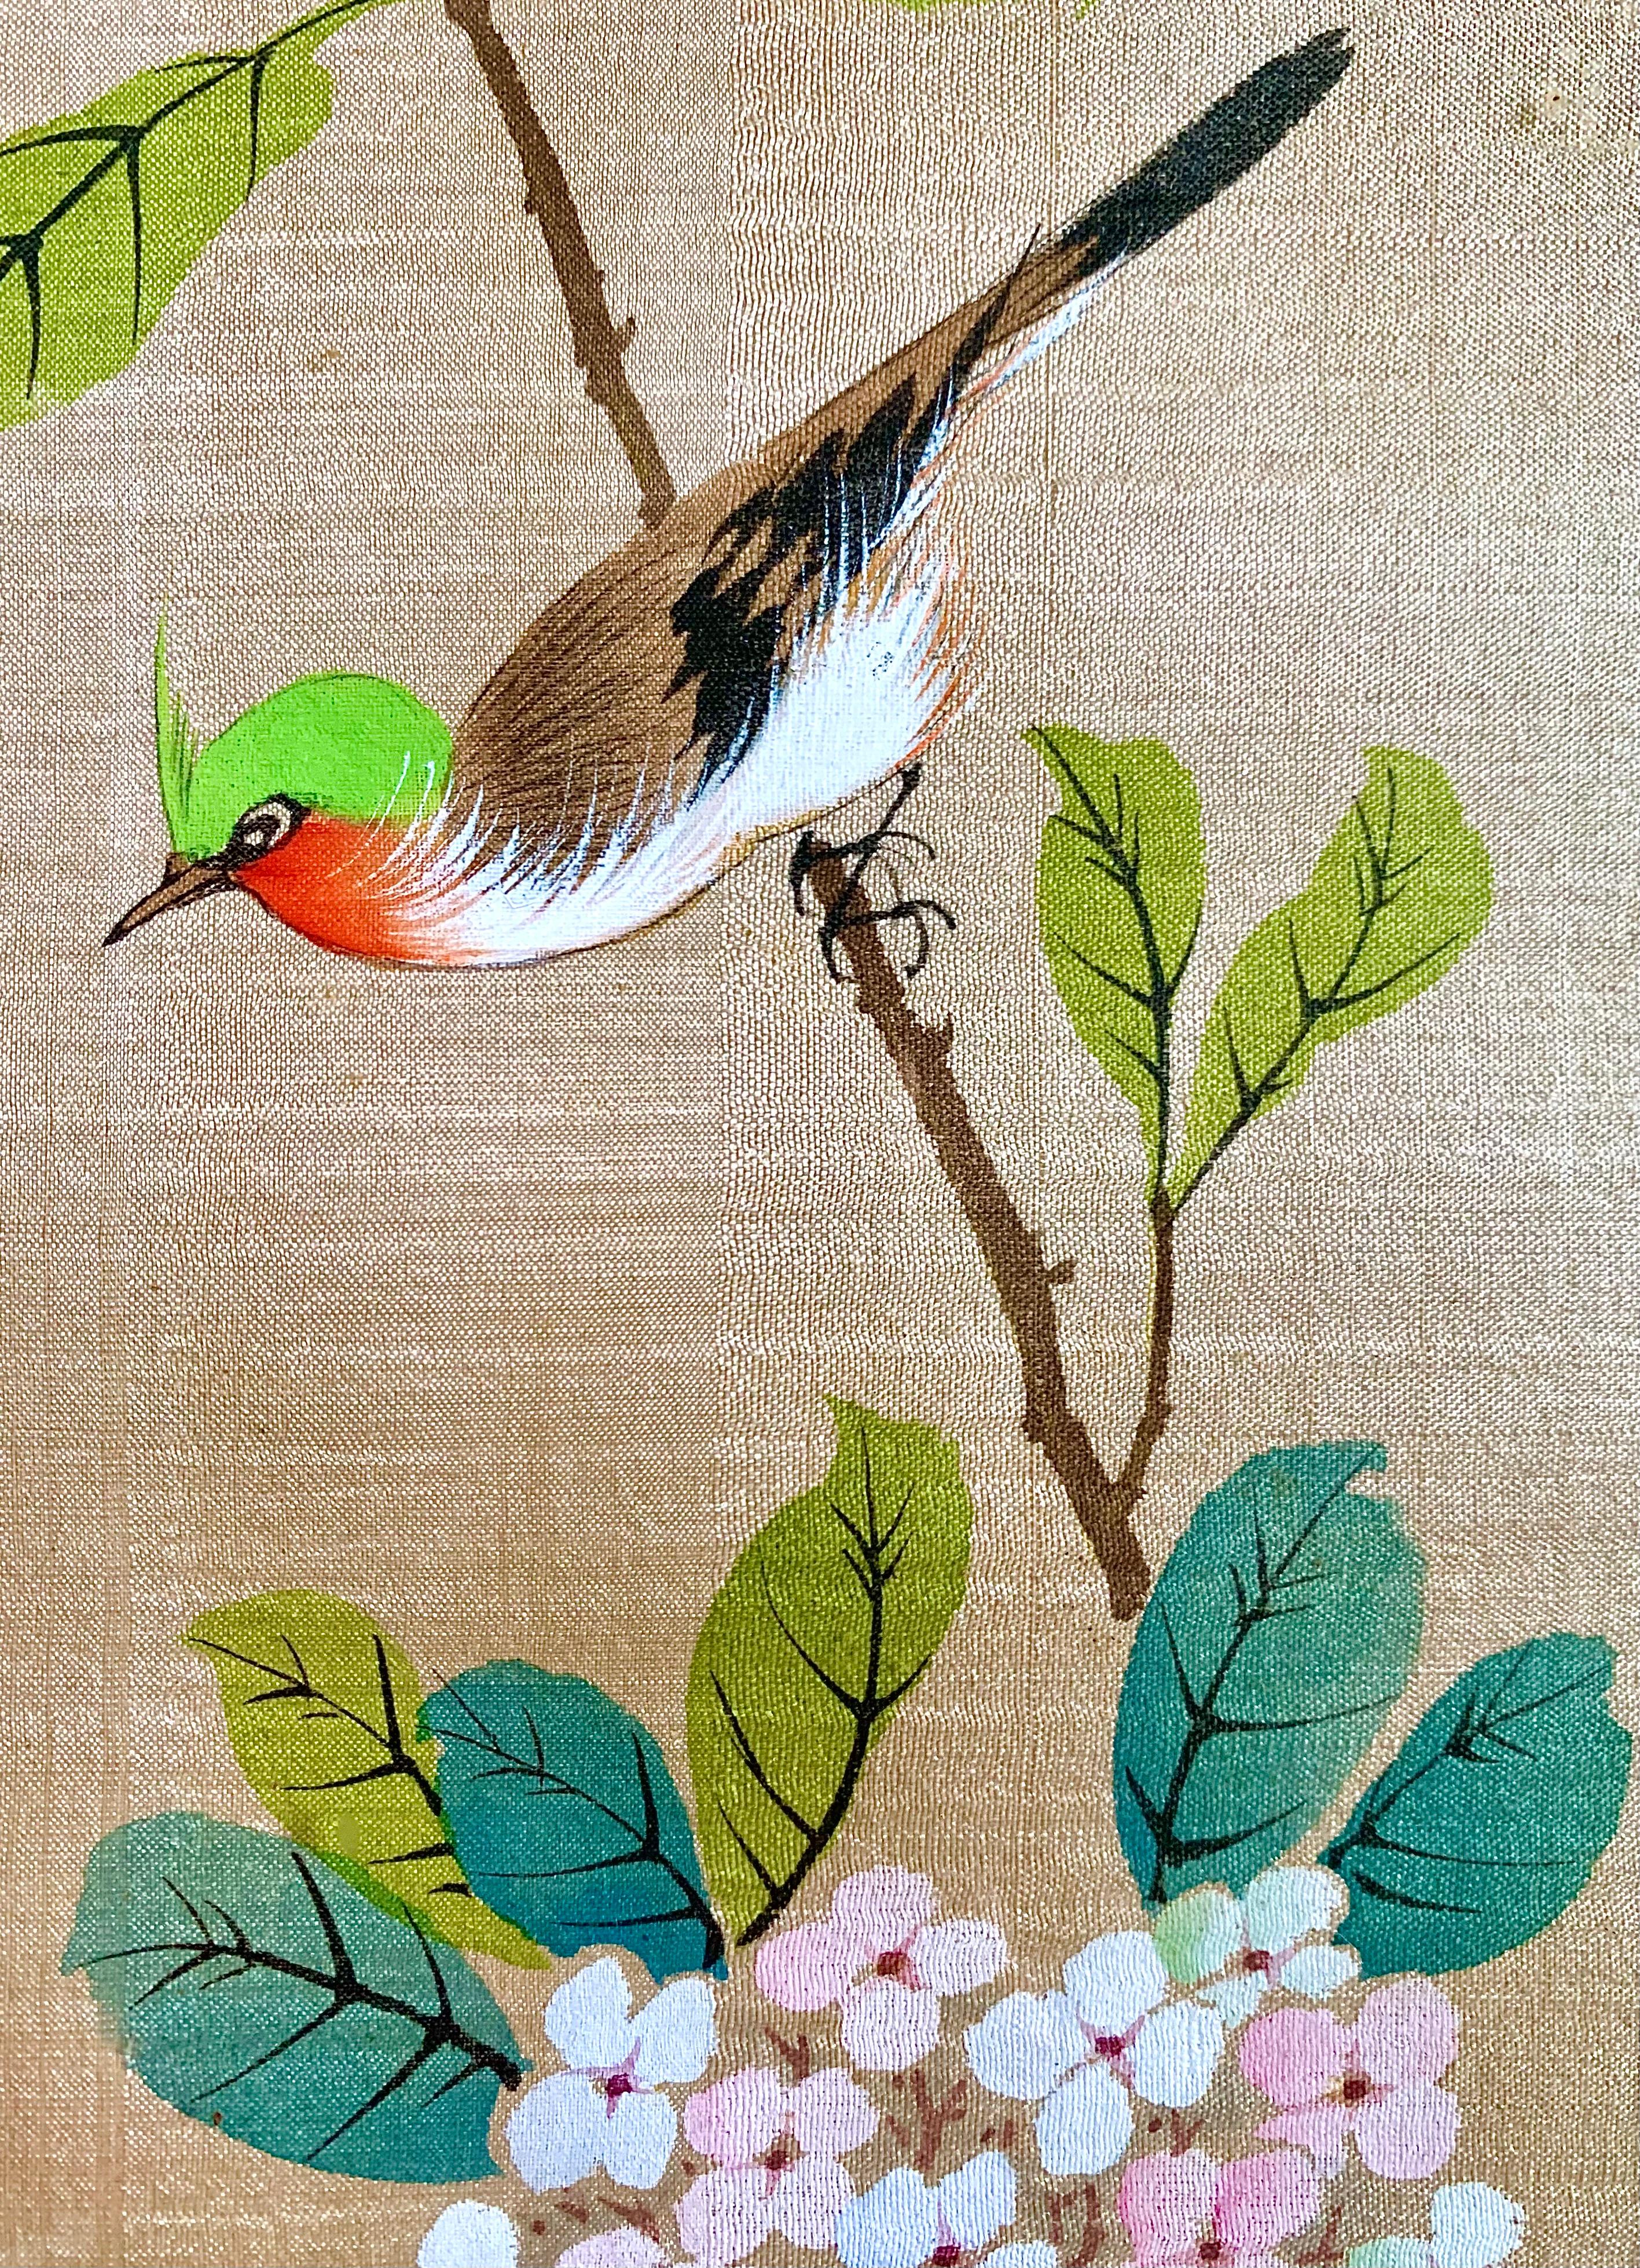 Nice painting on silk. It represents a bird, more precisely a woodpecker, on a branch with pretty pink and white flowers. The painted fabric is surrounded by another fabric with arabesque patterns. A Japanese writing is present in the upper right